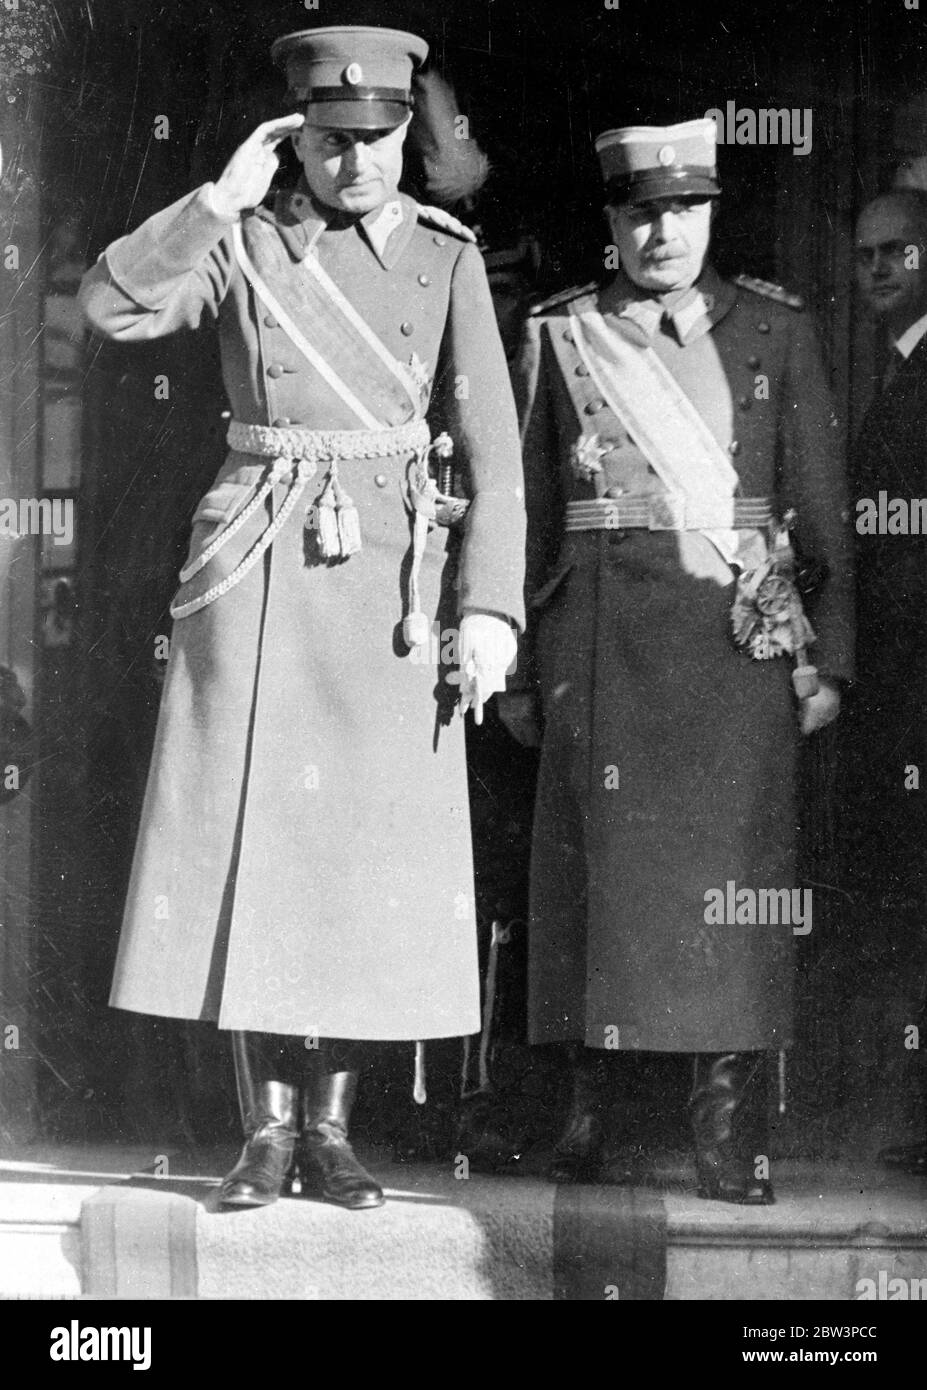 Prince Paul at the Deum in Belgrave commemorating foundation of Jugoslavia . Prince Paul , Chief Regent of Jugoslavia was present at Te Deum in Belgrade Cathedral to commemorate the aniversary of the founding of Jugoslavia . Photo shows , Prince Paul leaving the Cathedral after the Te Deum 7 December 1935 Stock Photo